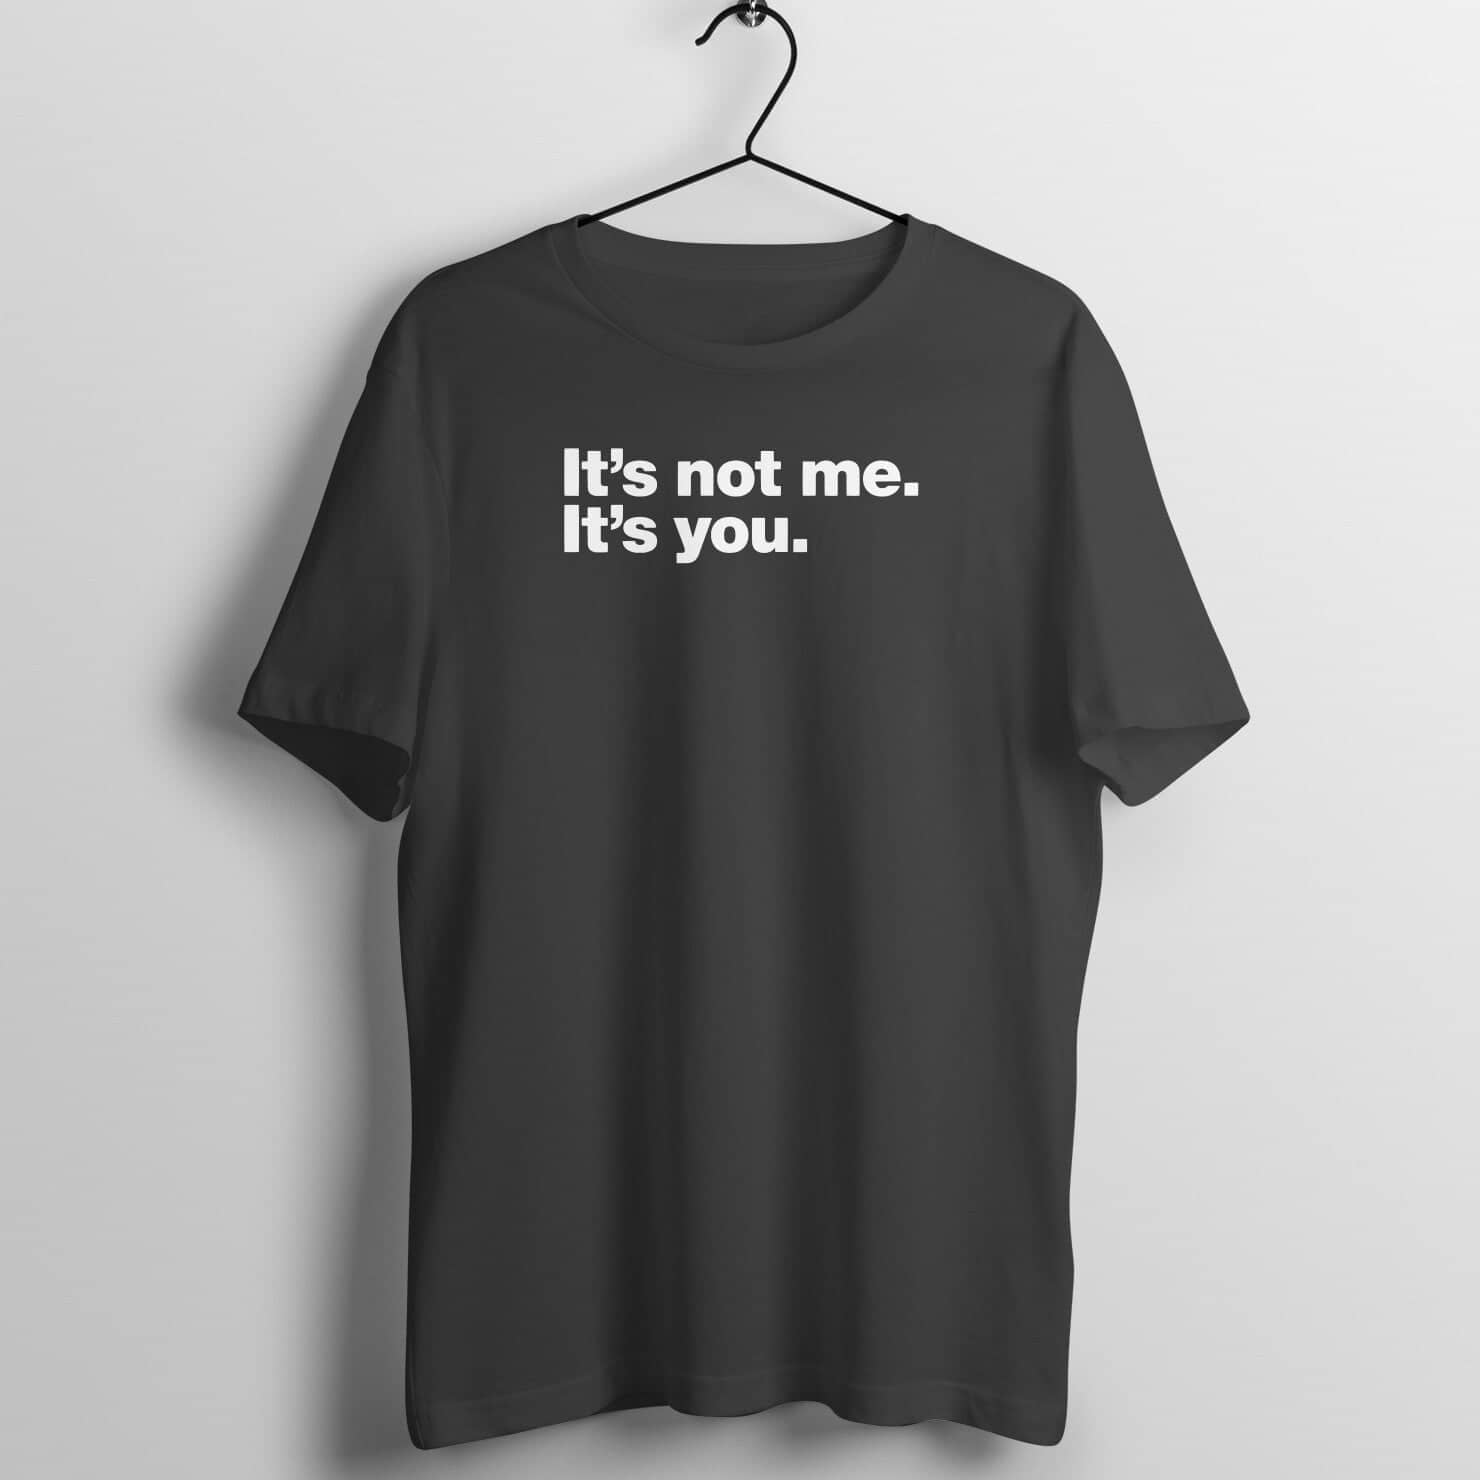 It's Not Me. It's You Funny Black T Shirt for Men and Women freeshipping - Catch My Drift India